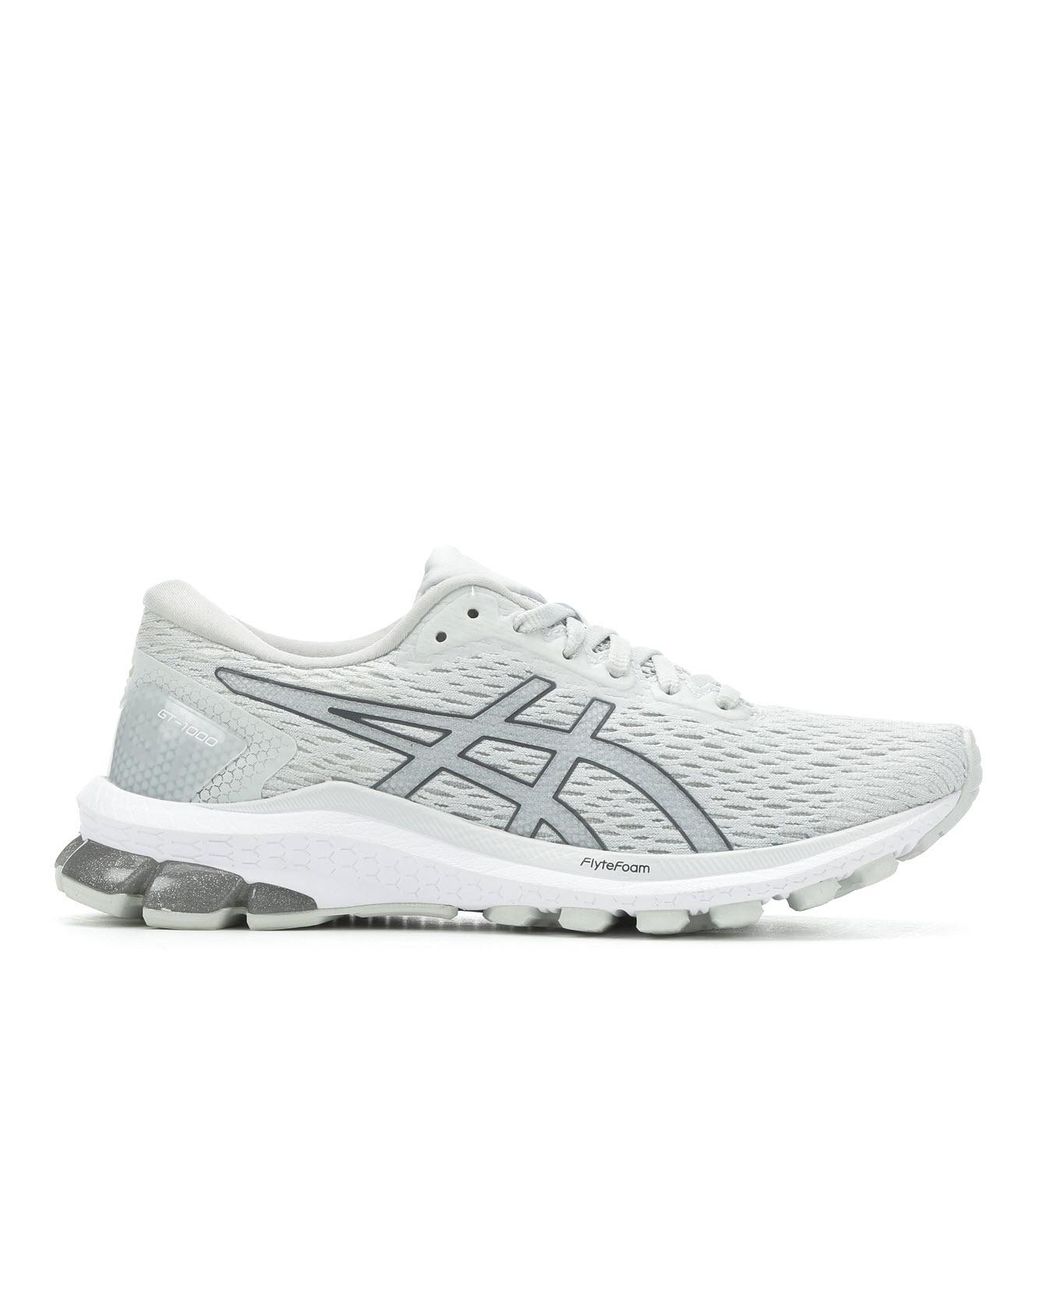 Asics Gt 1000 9 Athletic Shoe in White,Silver (White) - Lyst